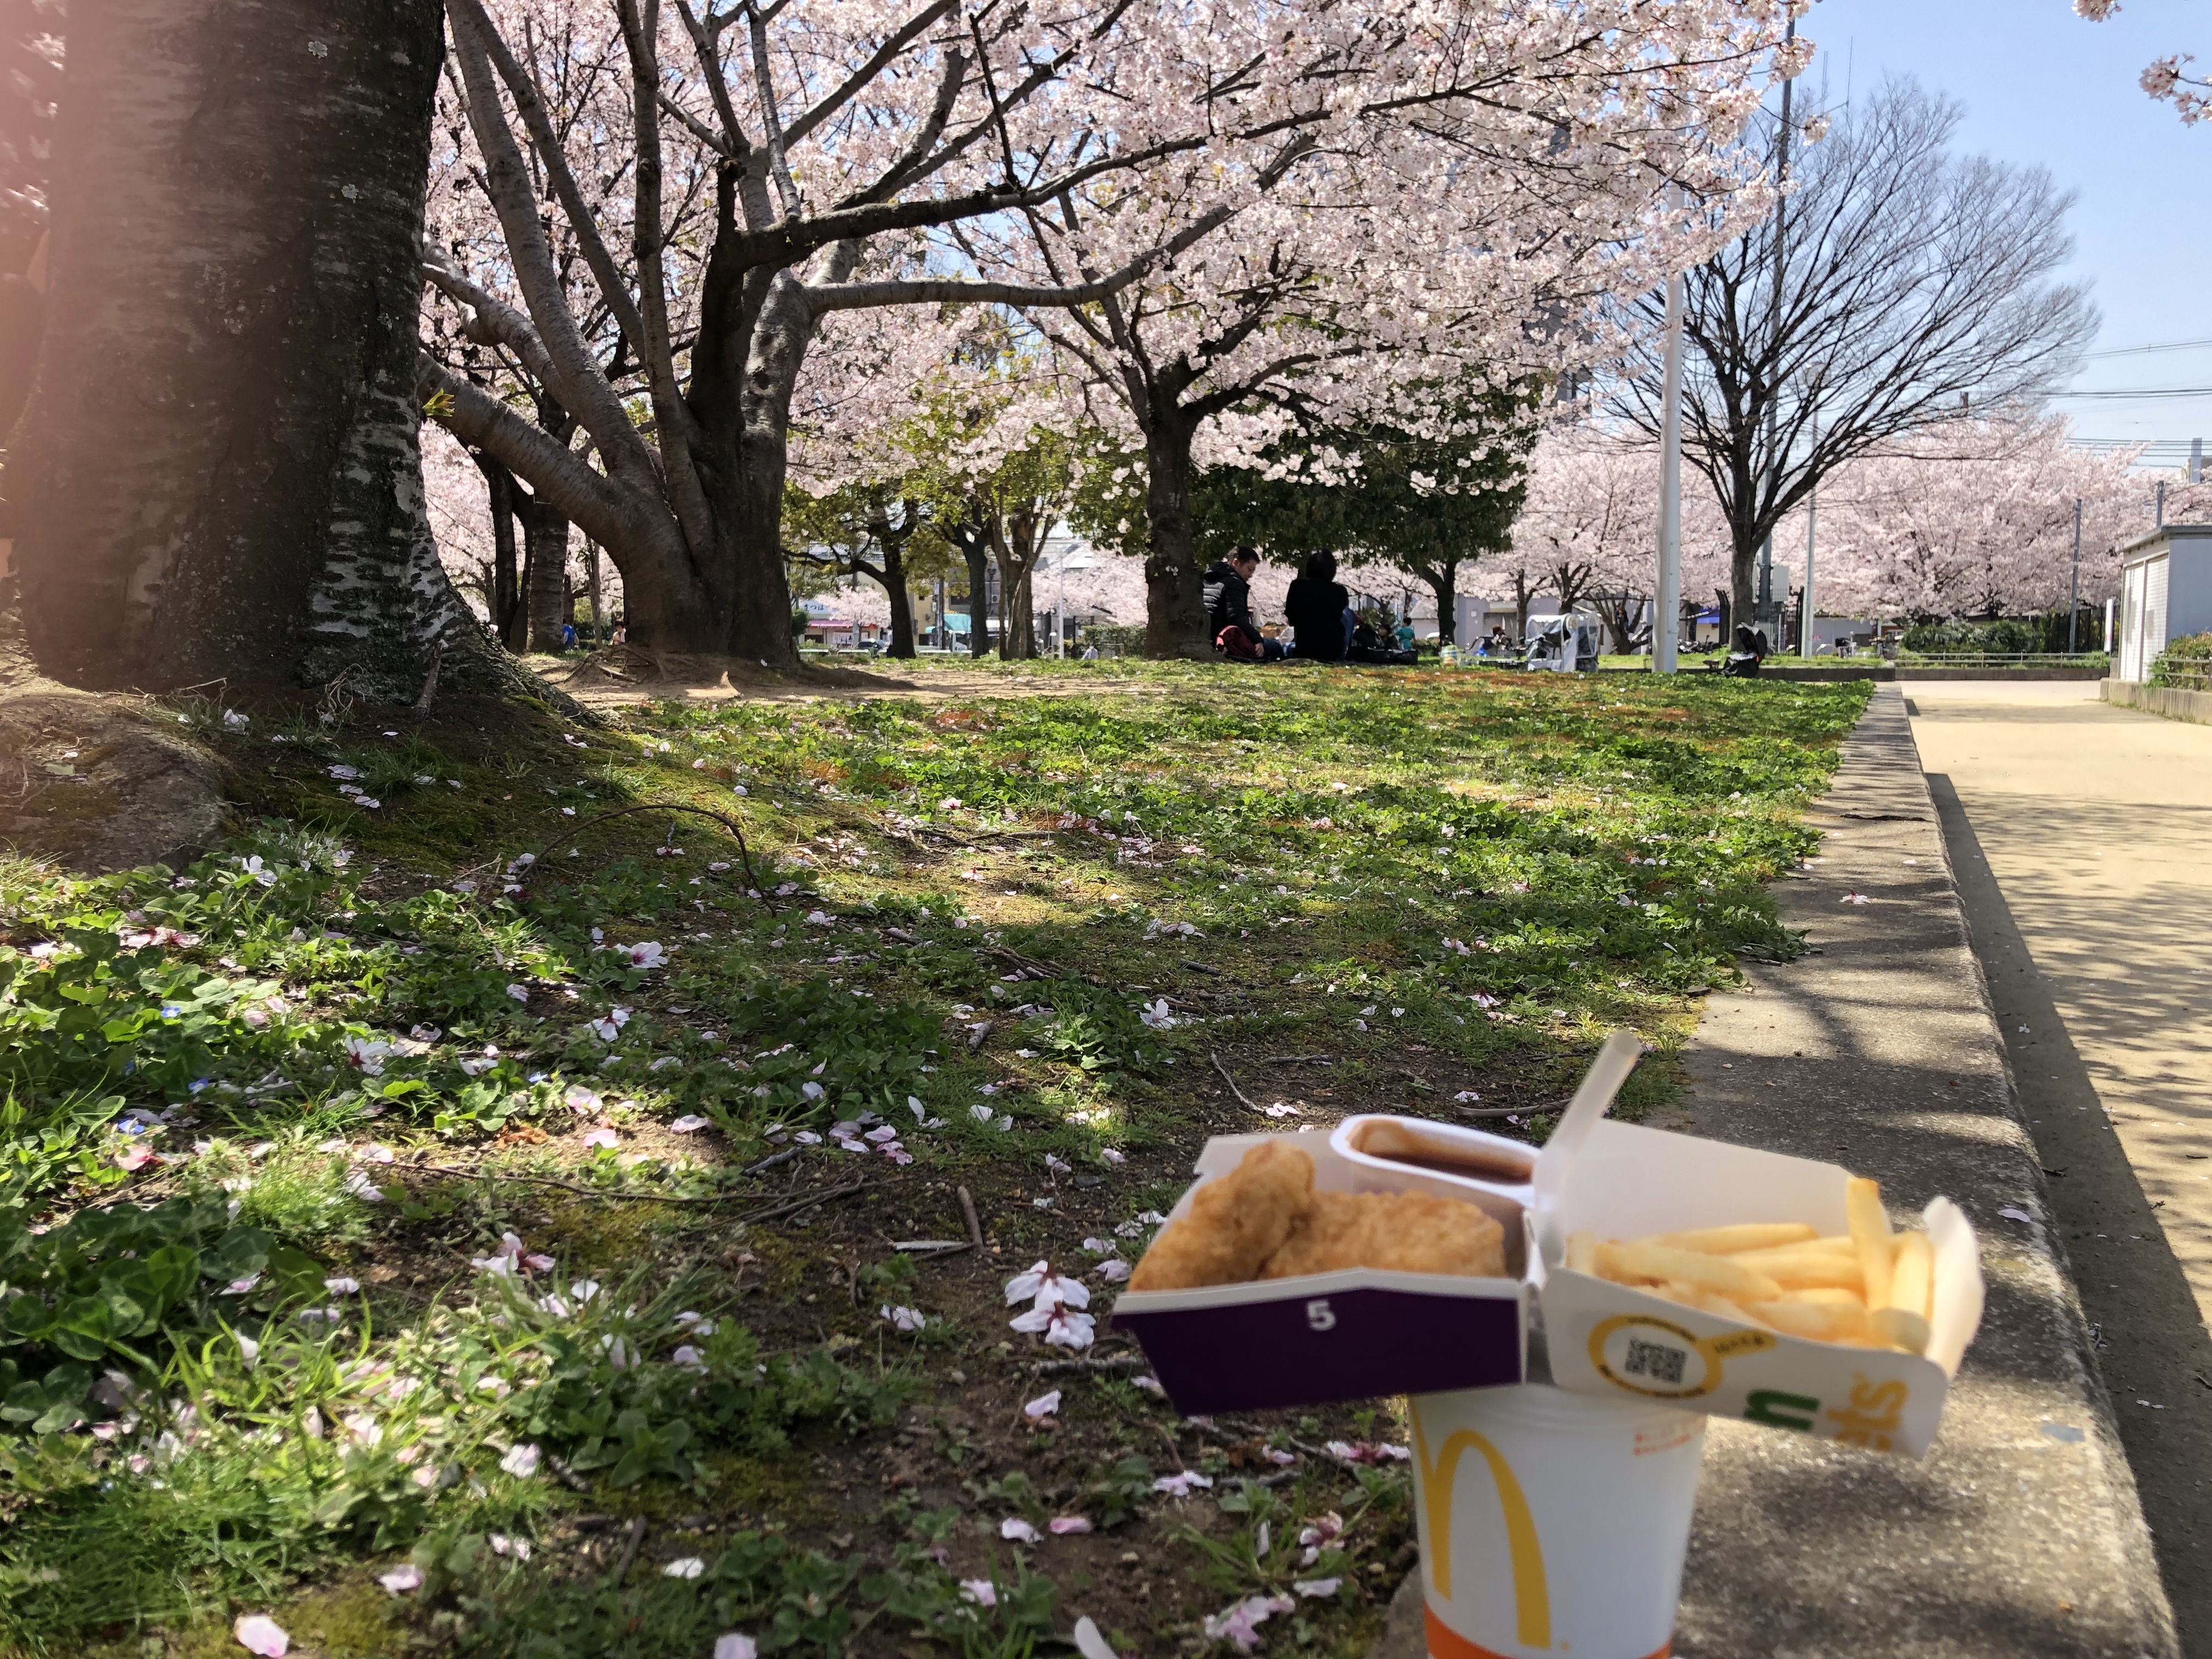 Enjoy one-handed cherry-bloom viewing picnic with this McHanami hack